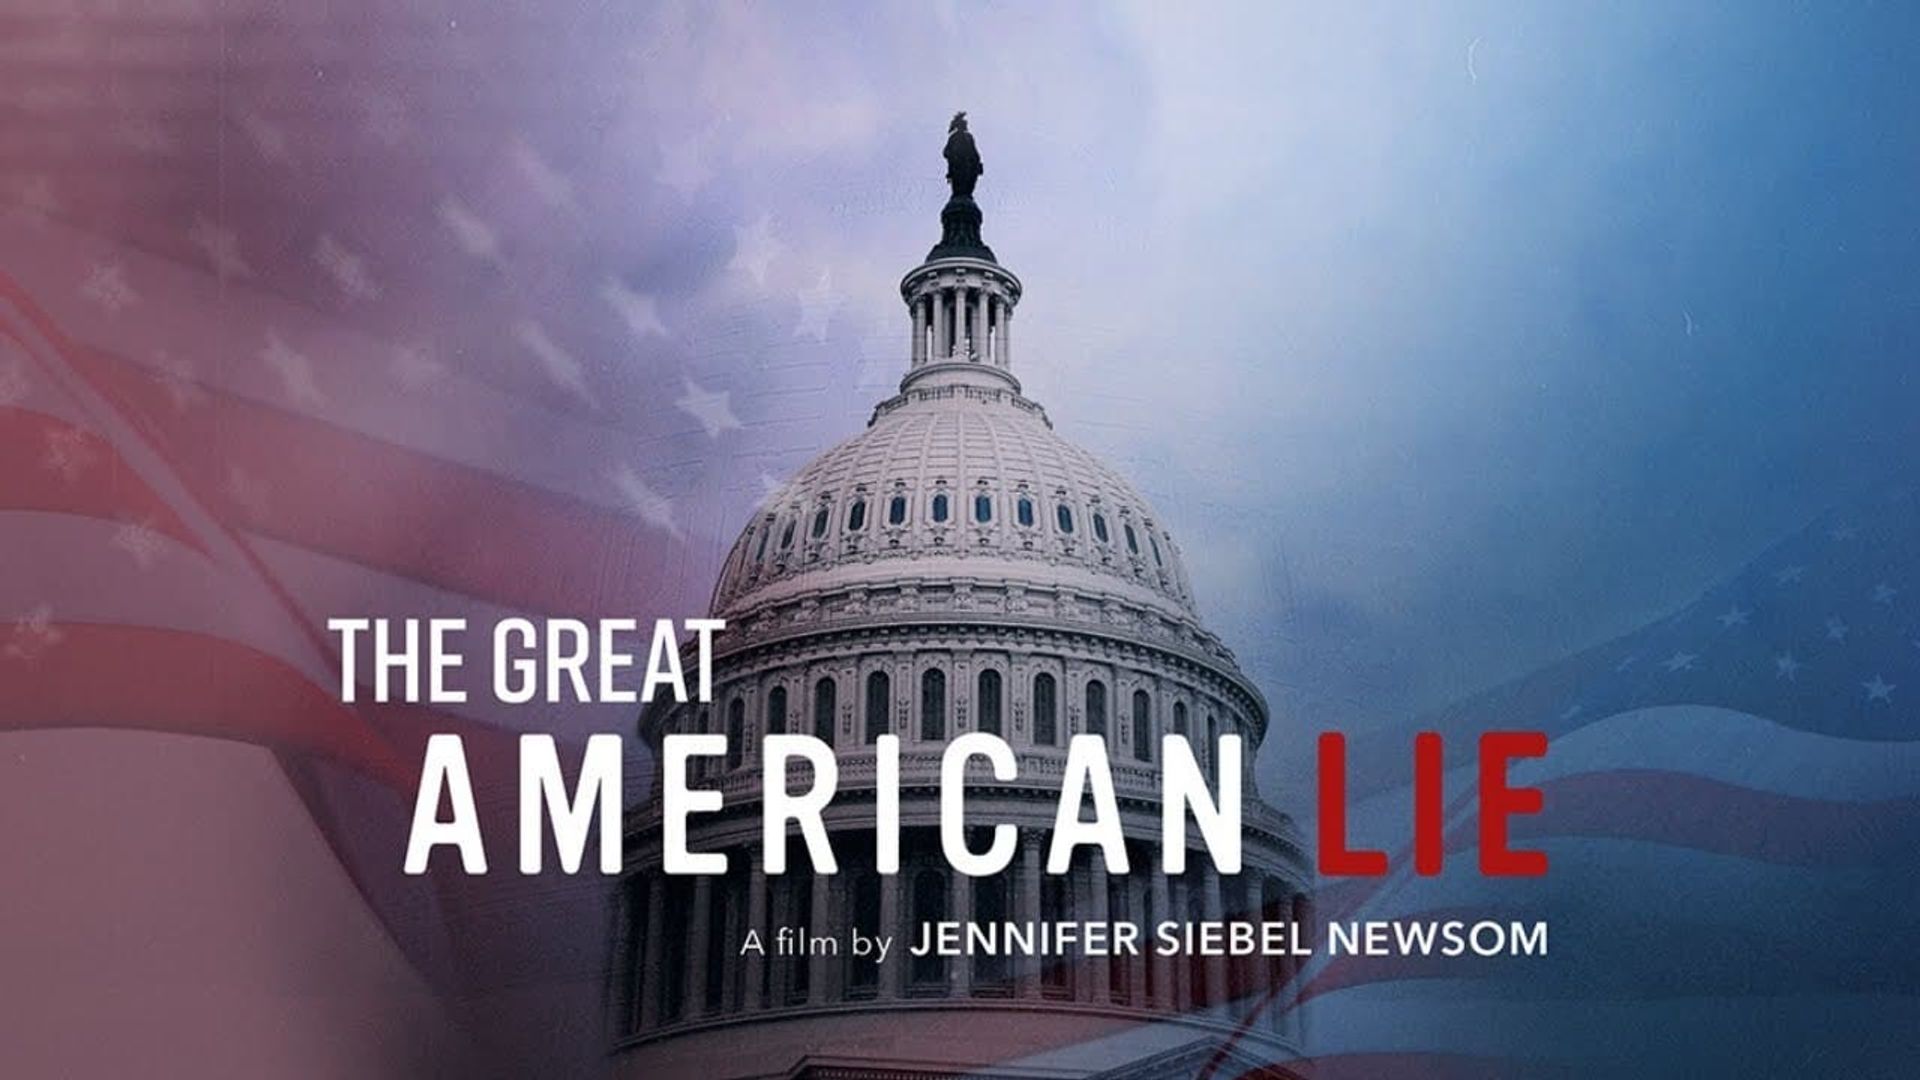 The Great American Lie background